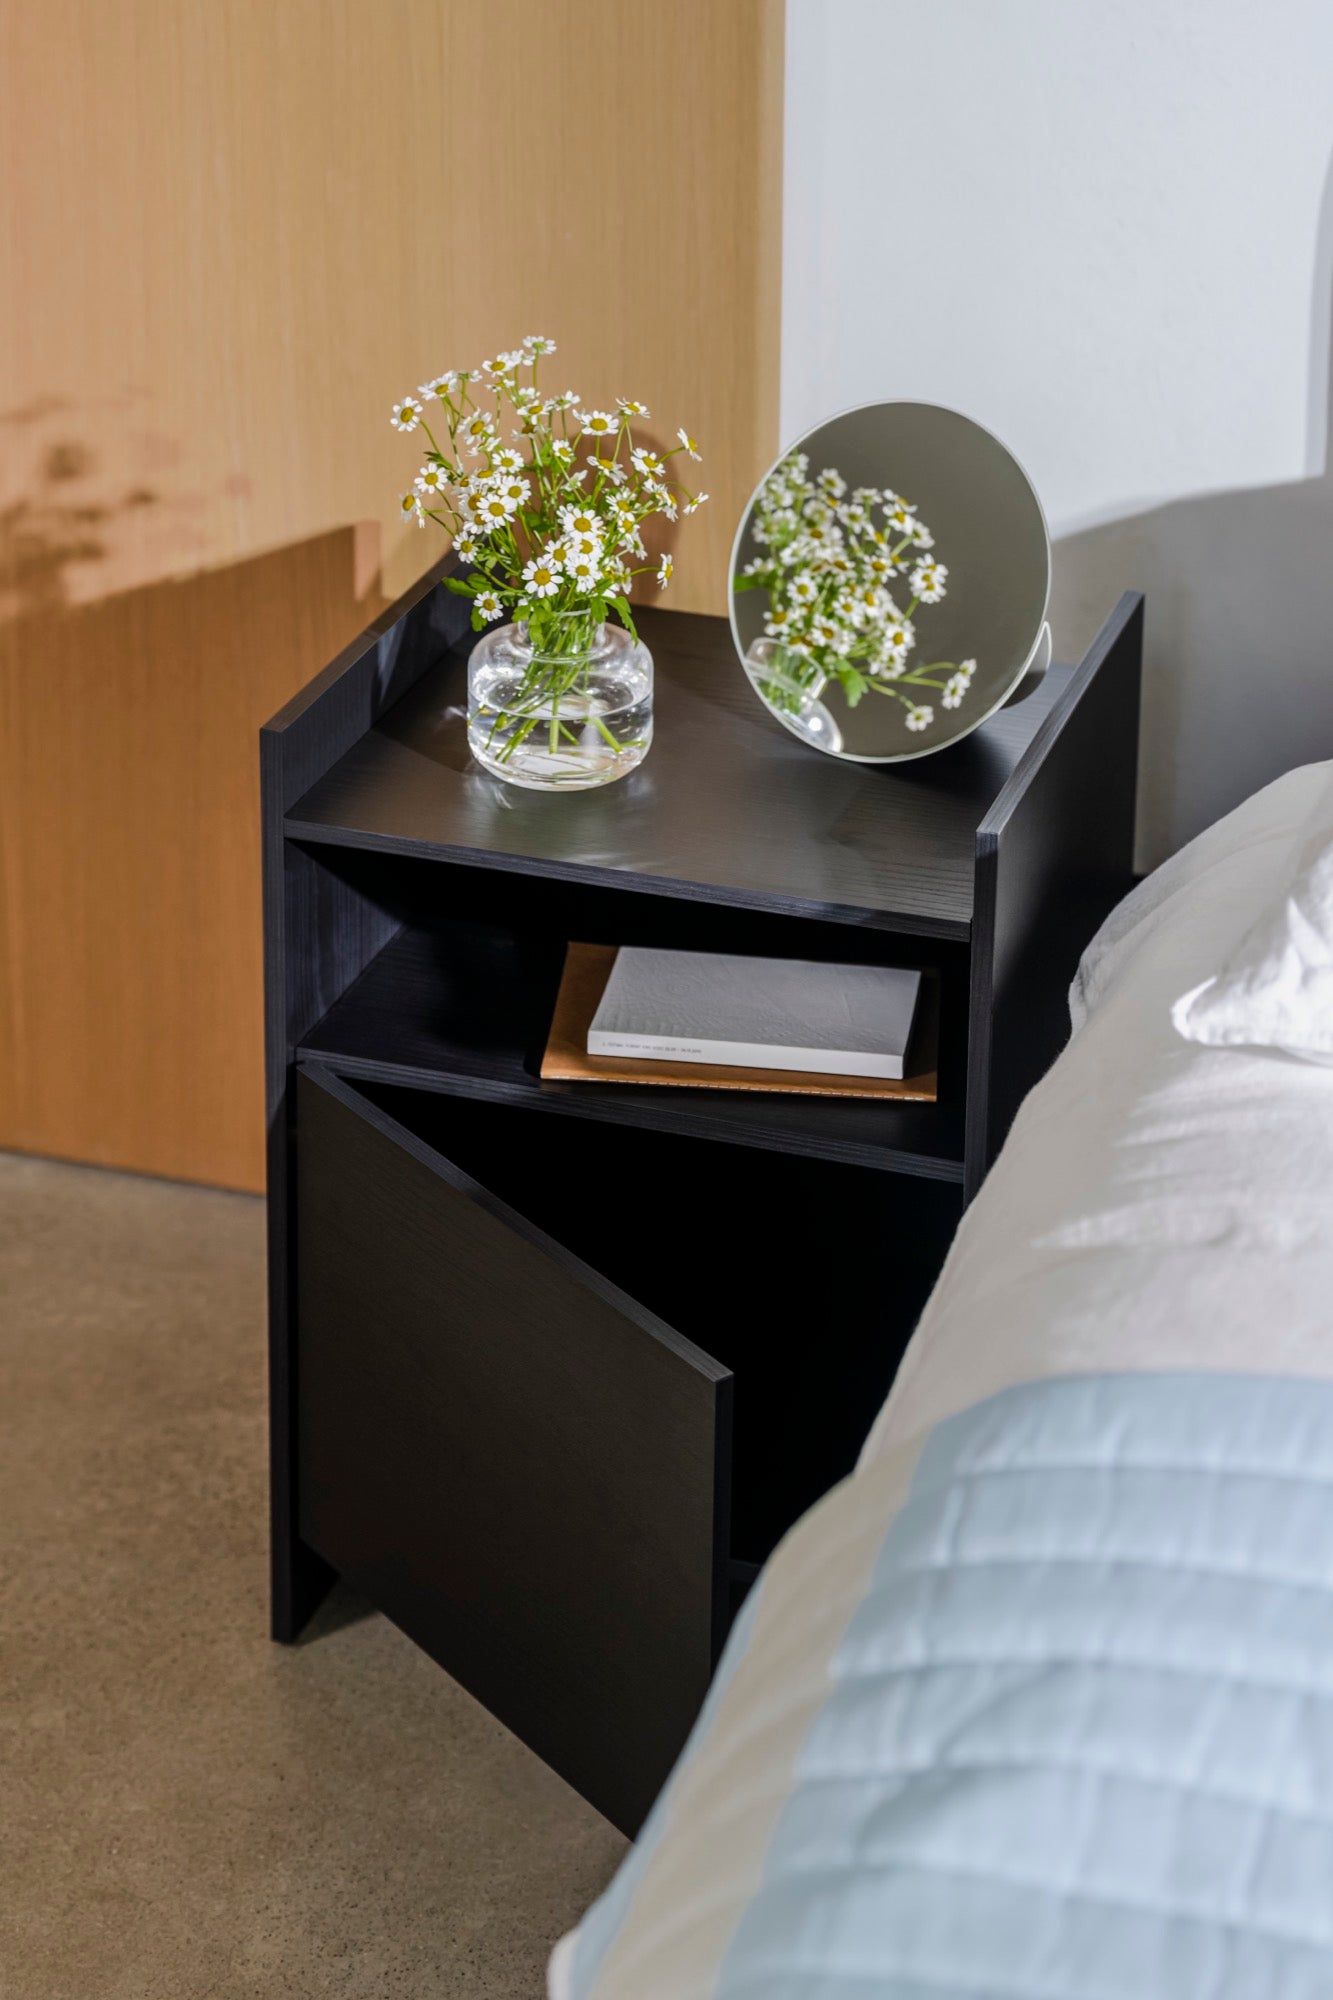 A Compact Black Nightstand for Bedroom Décor